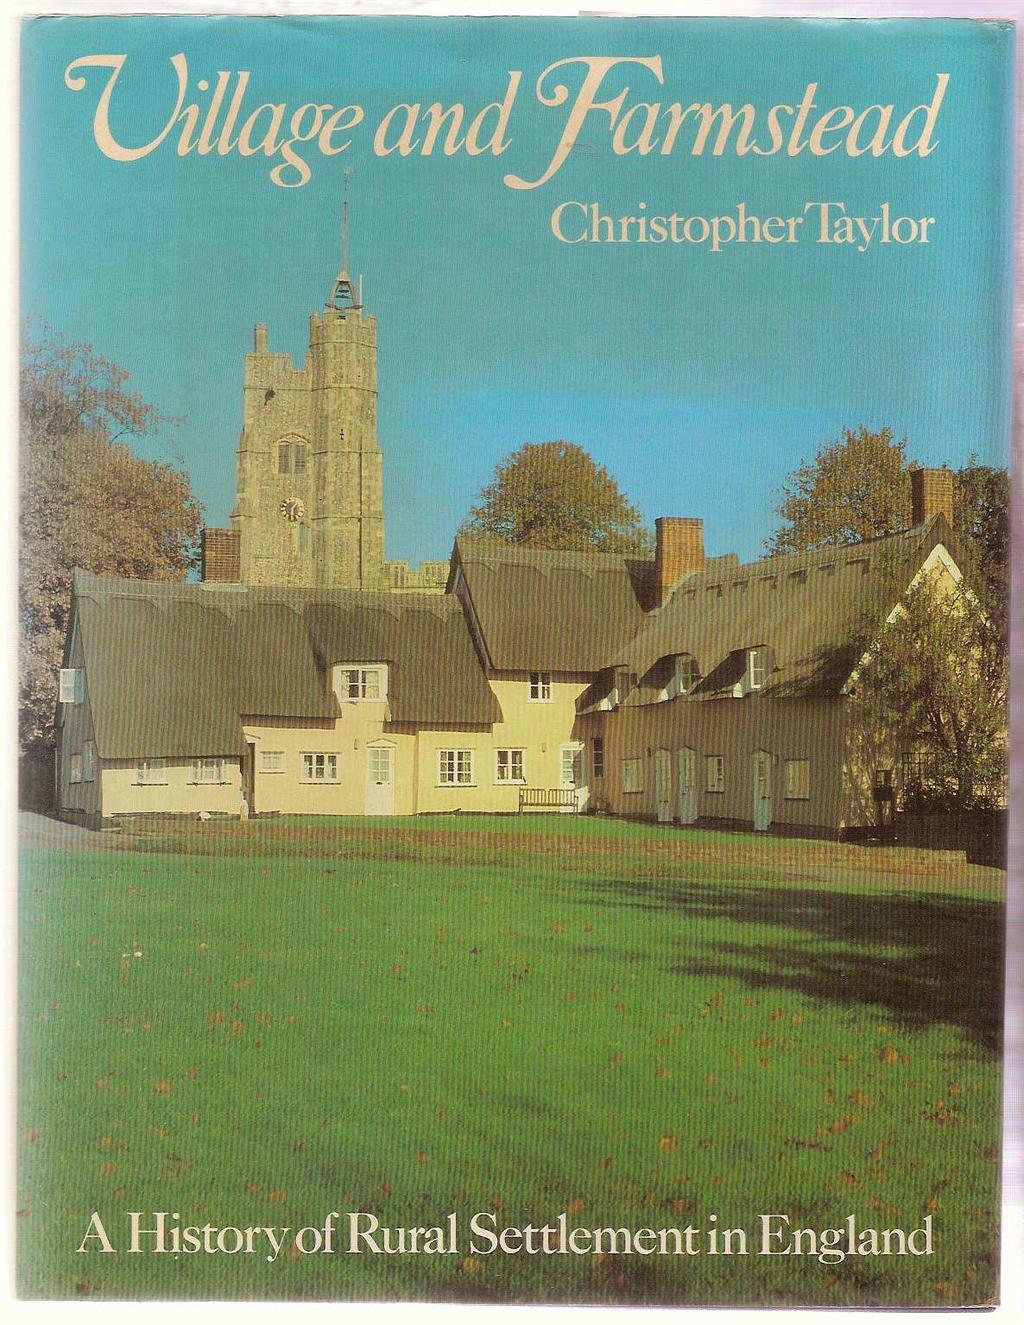 Taylor, Christopher, Village and farmstead: a history of rural settlement in England. London: Philip, 1983.